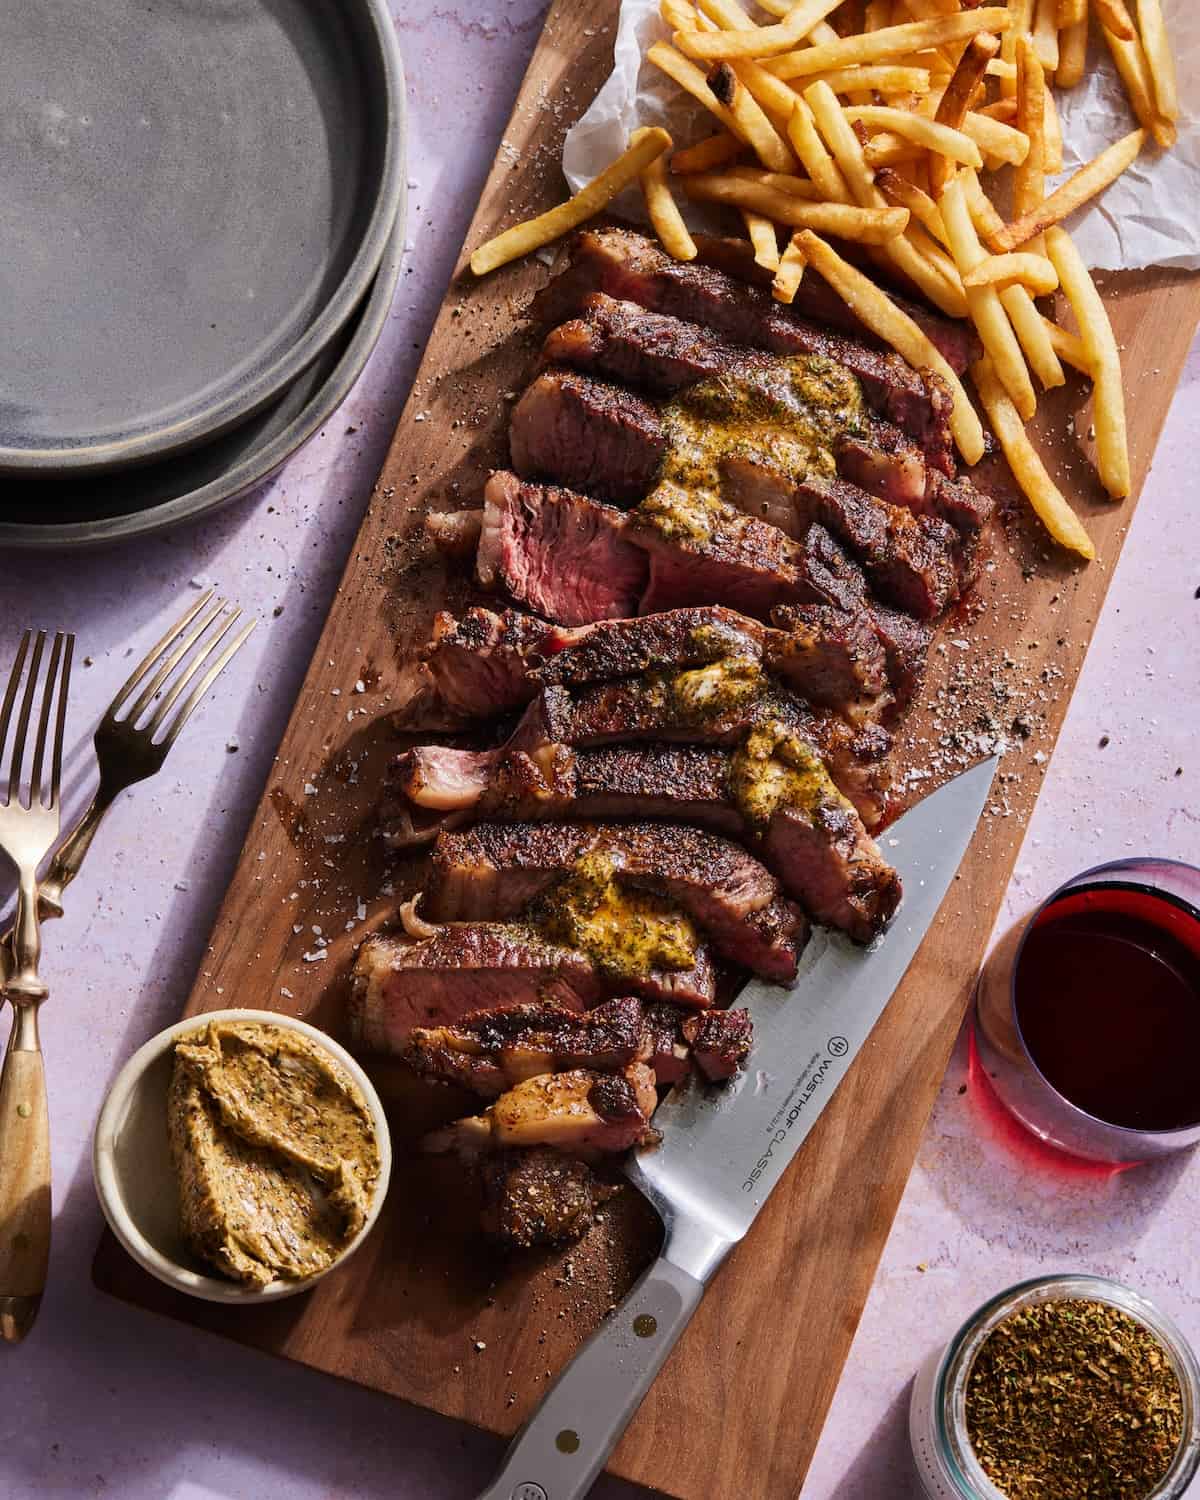 Chimichurri Steak (cooked via Reverse Sear) with a side of french fries and a herb compound butter